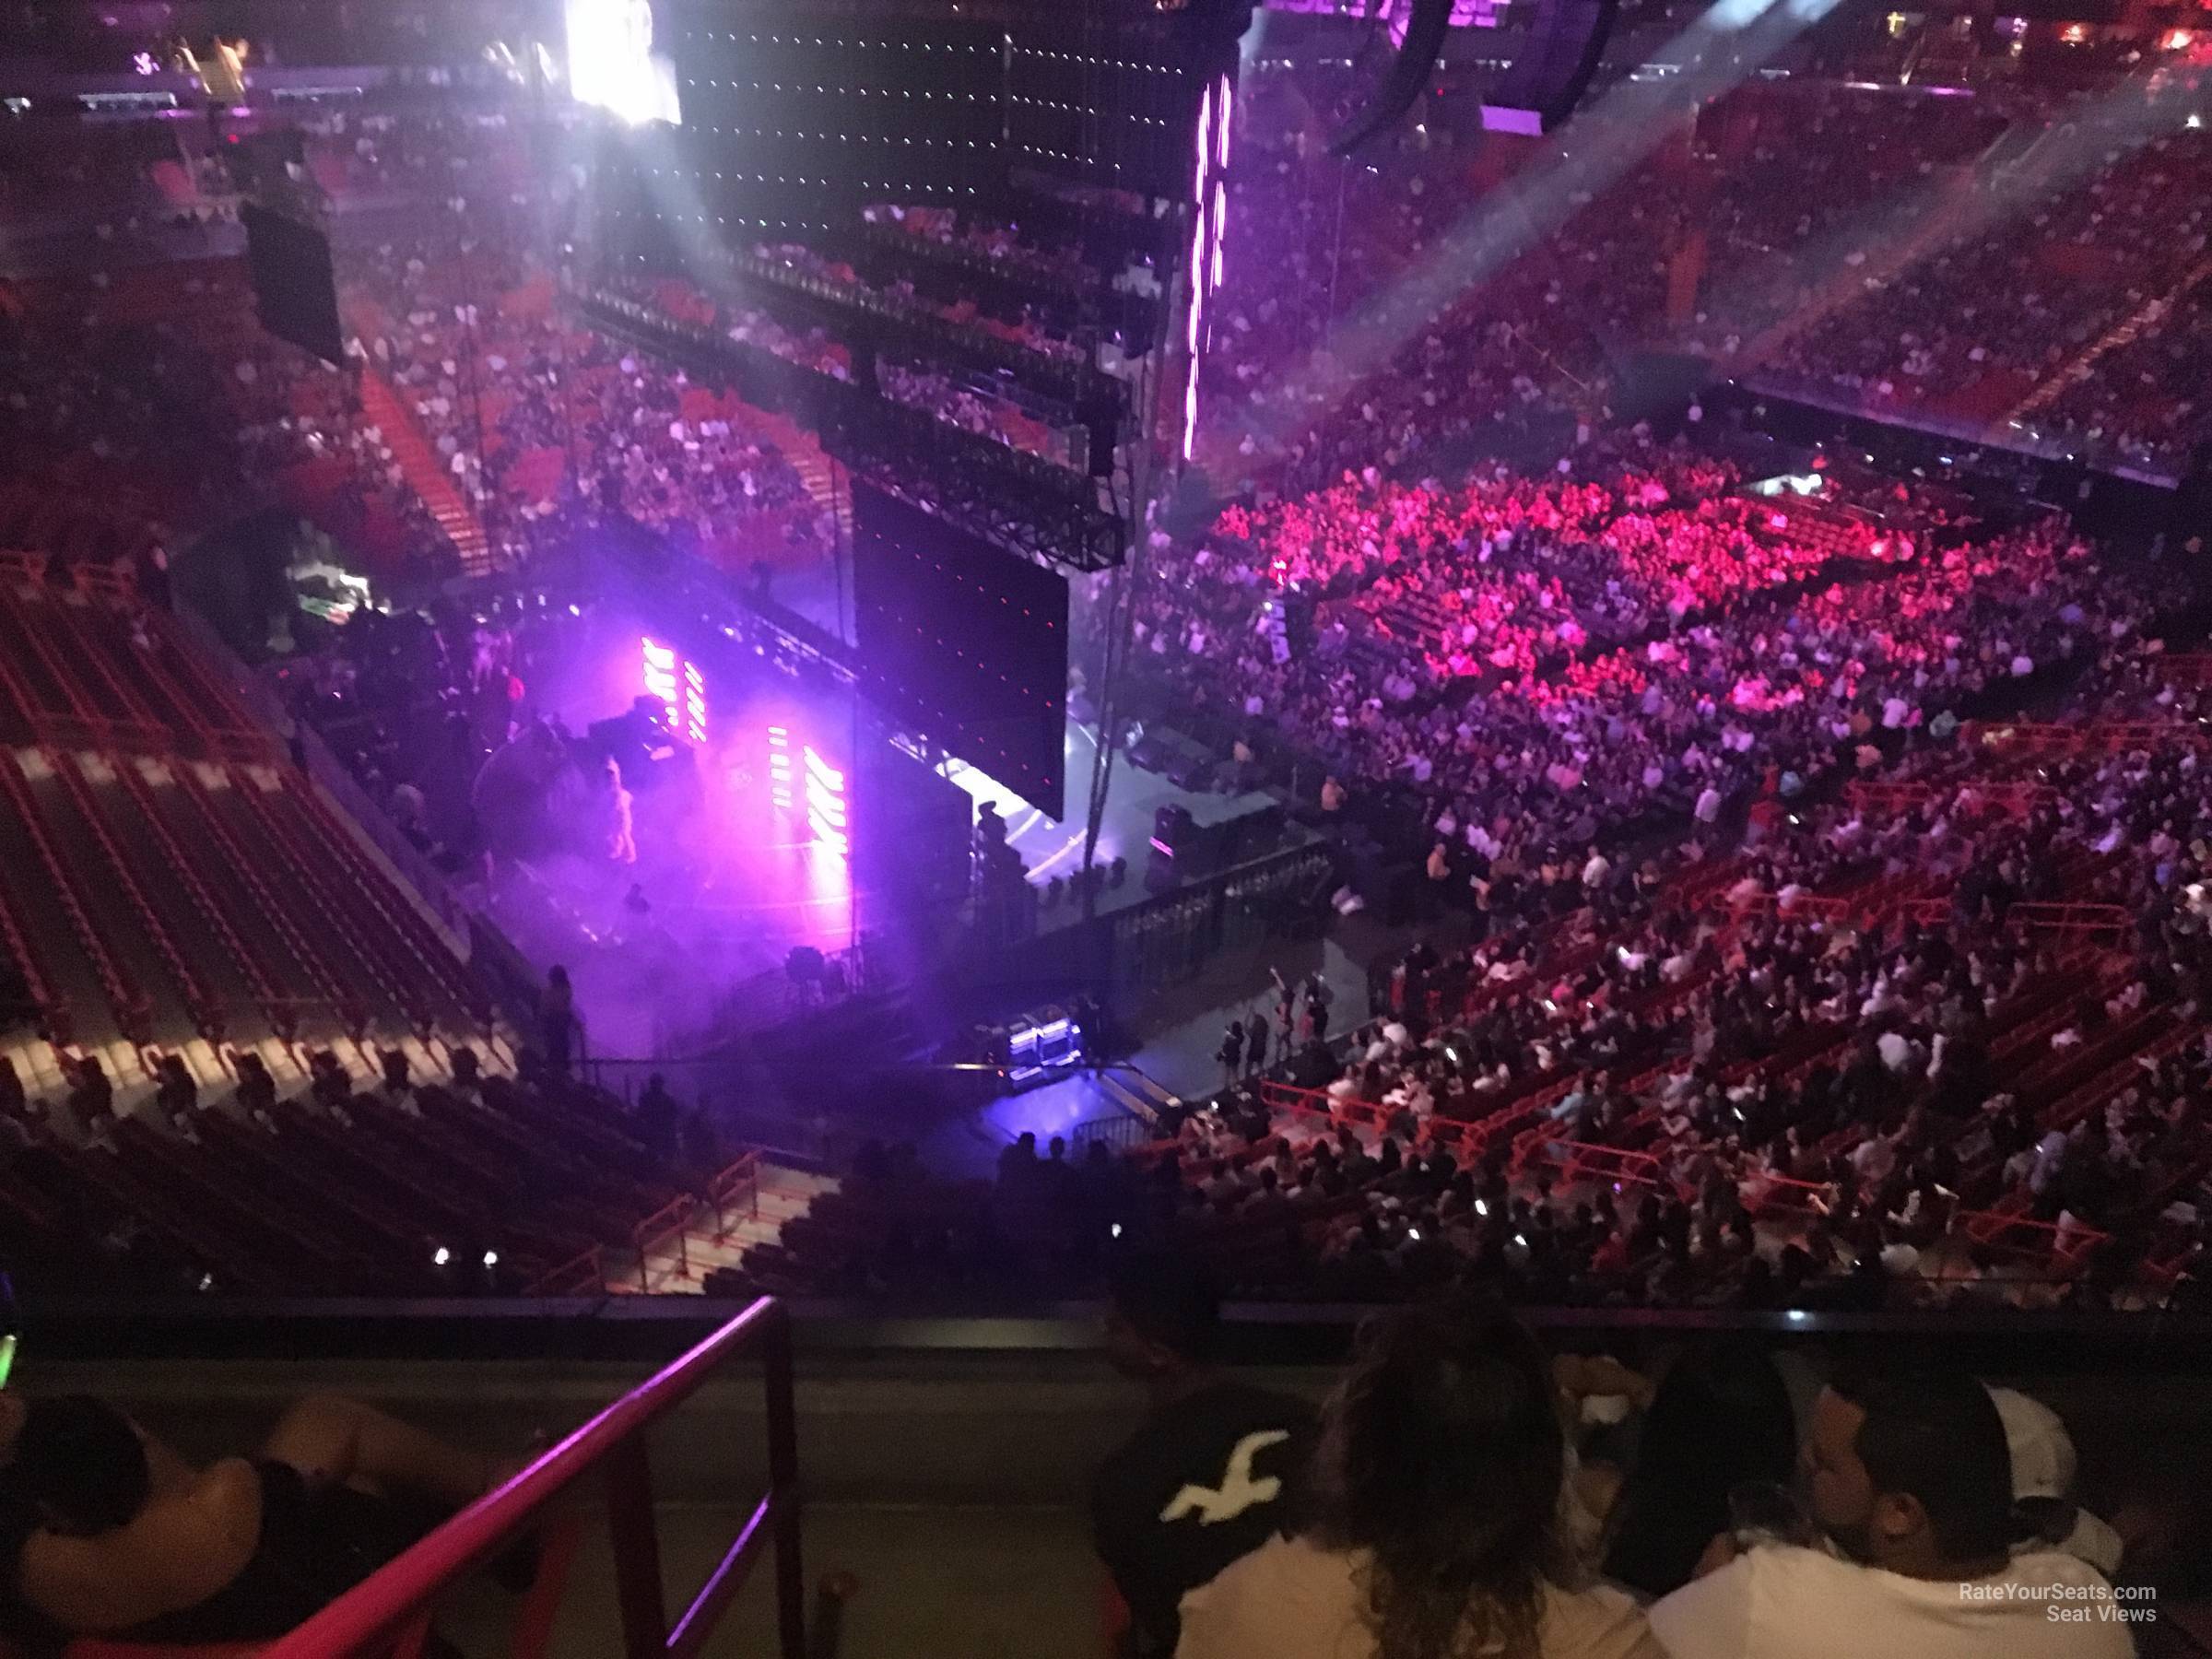 section 329, row 3 seat view  for concert - miami-dade arena